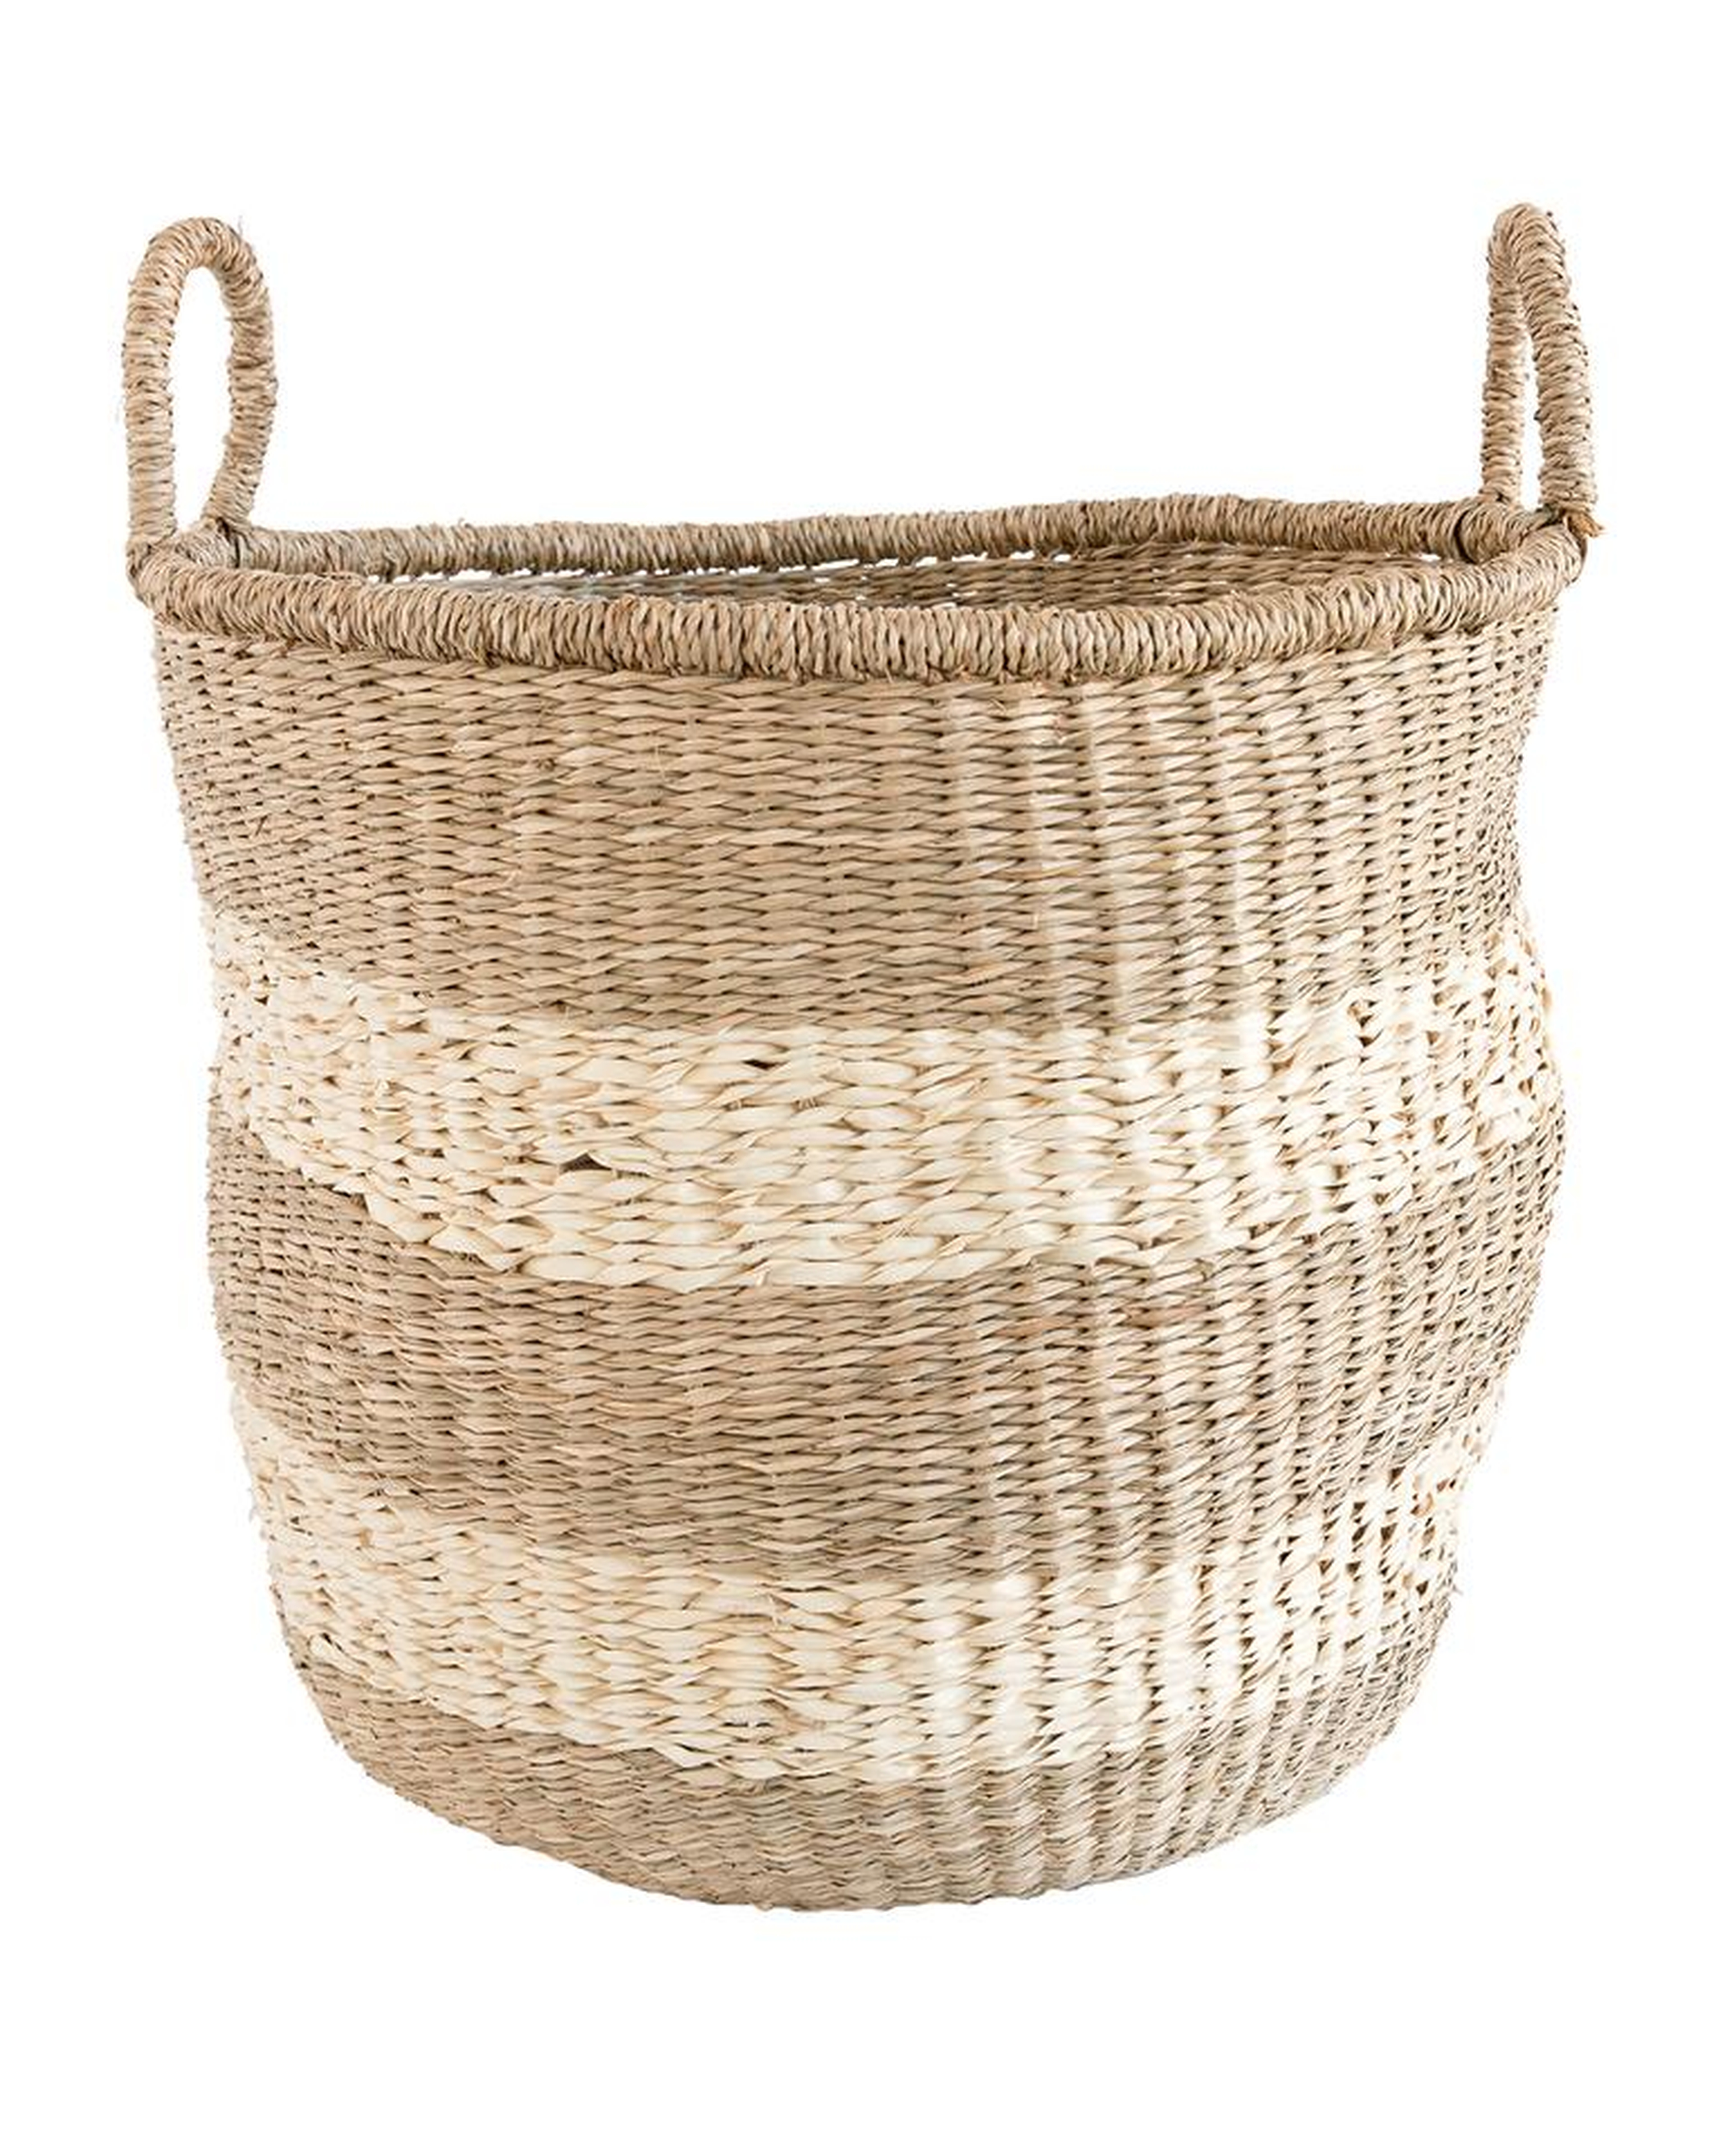 STRIPED ROUND BASKET - LARGE - McGee & Co.